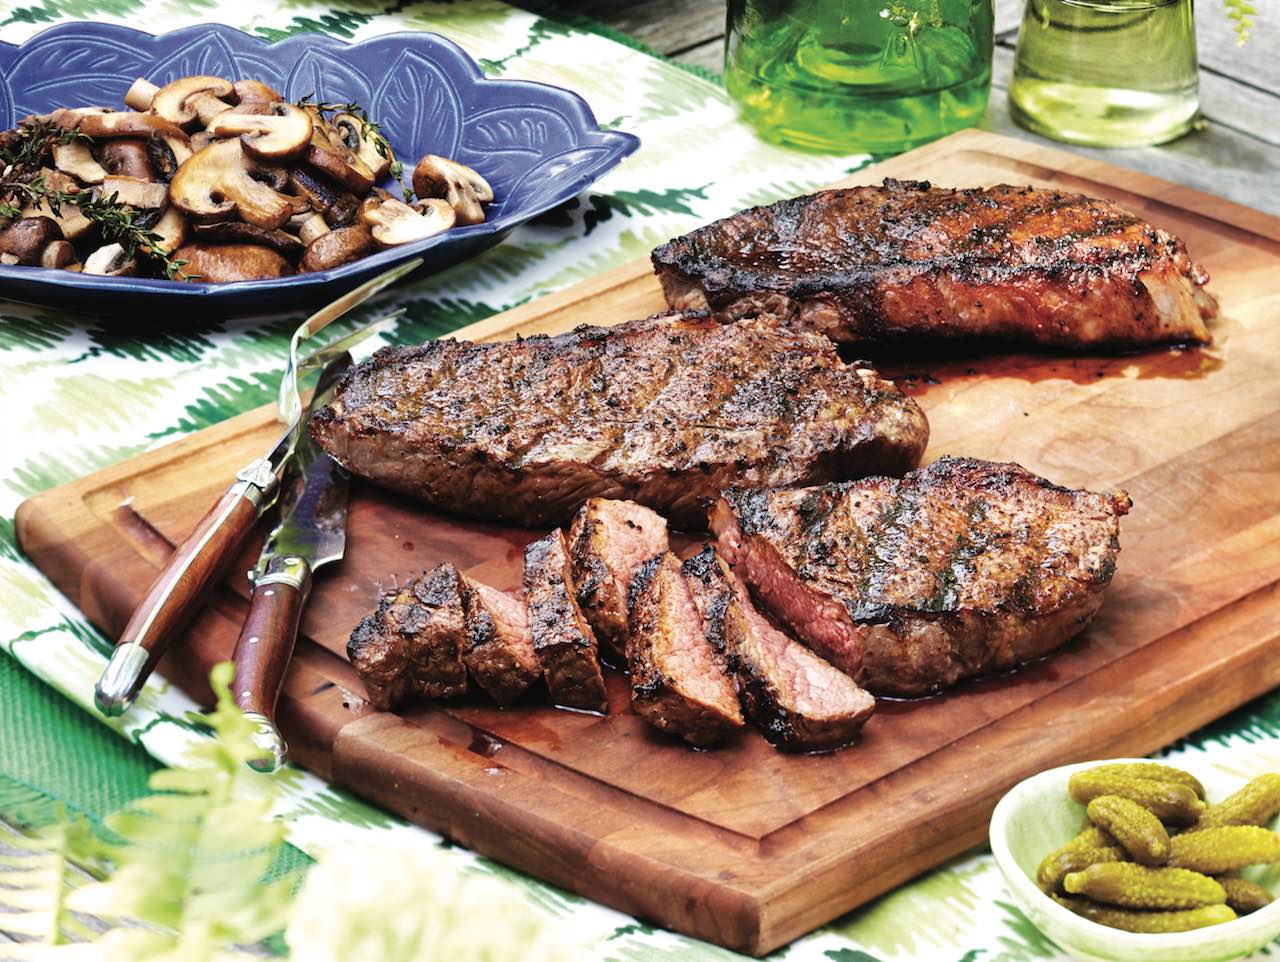 grilled steak on a wooden cutting board